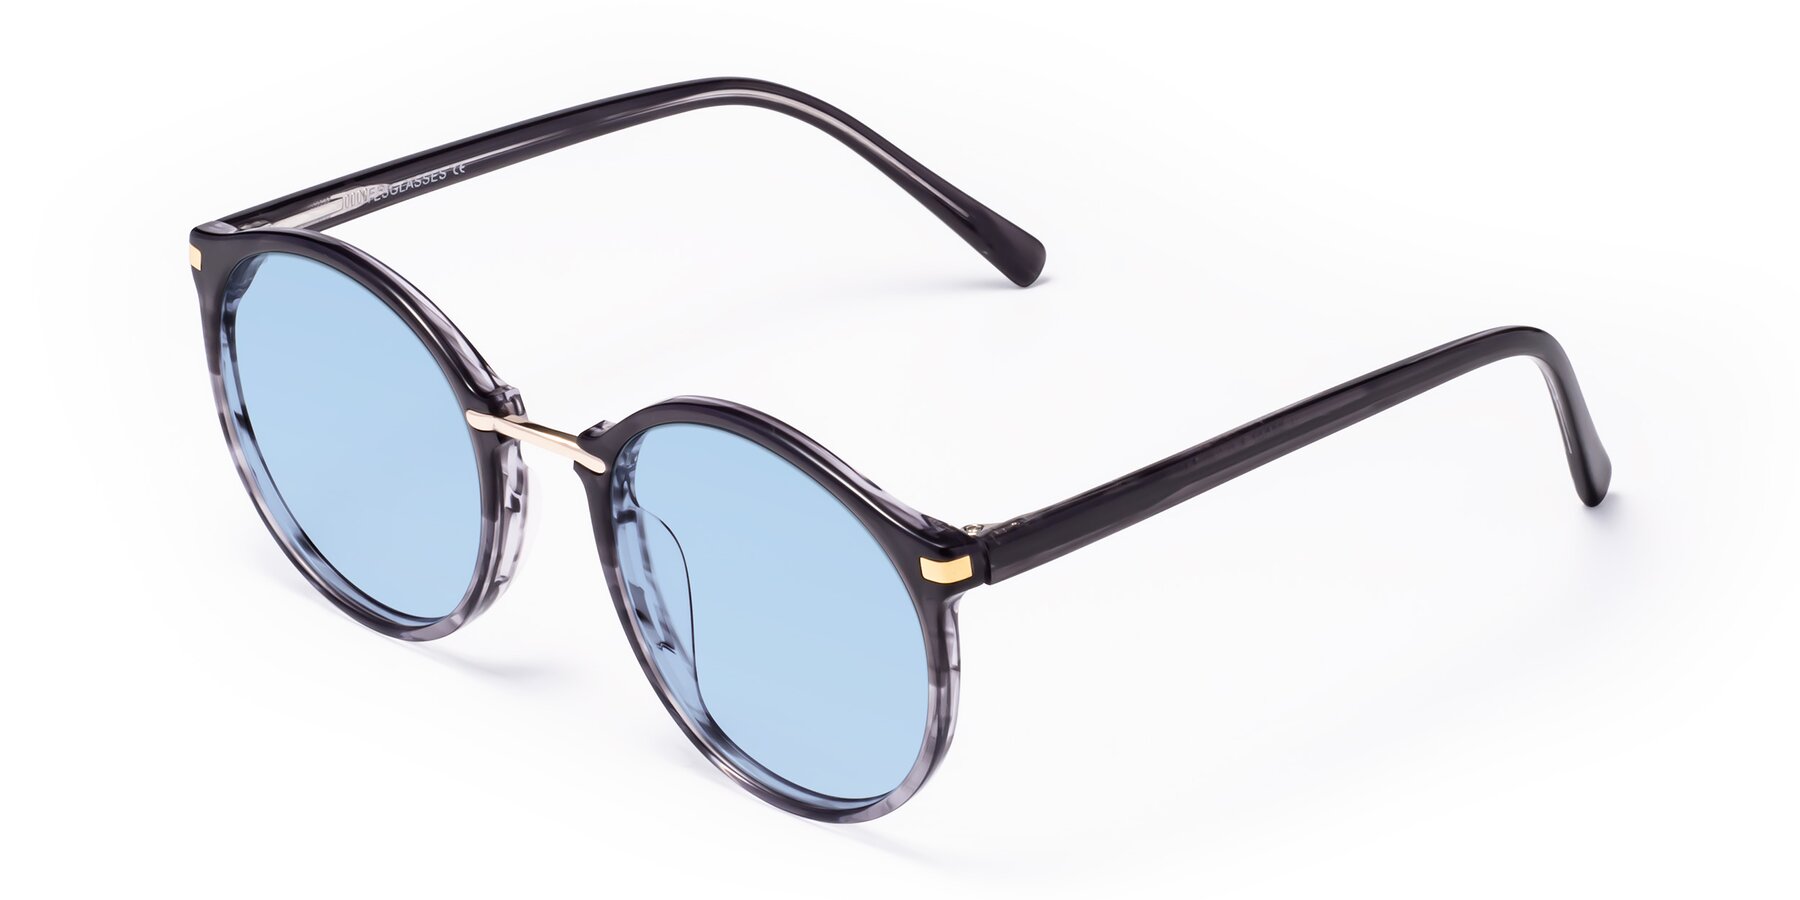 Angle of Casper in Translucent Black with Light Blue Tinted Lenses